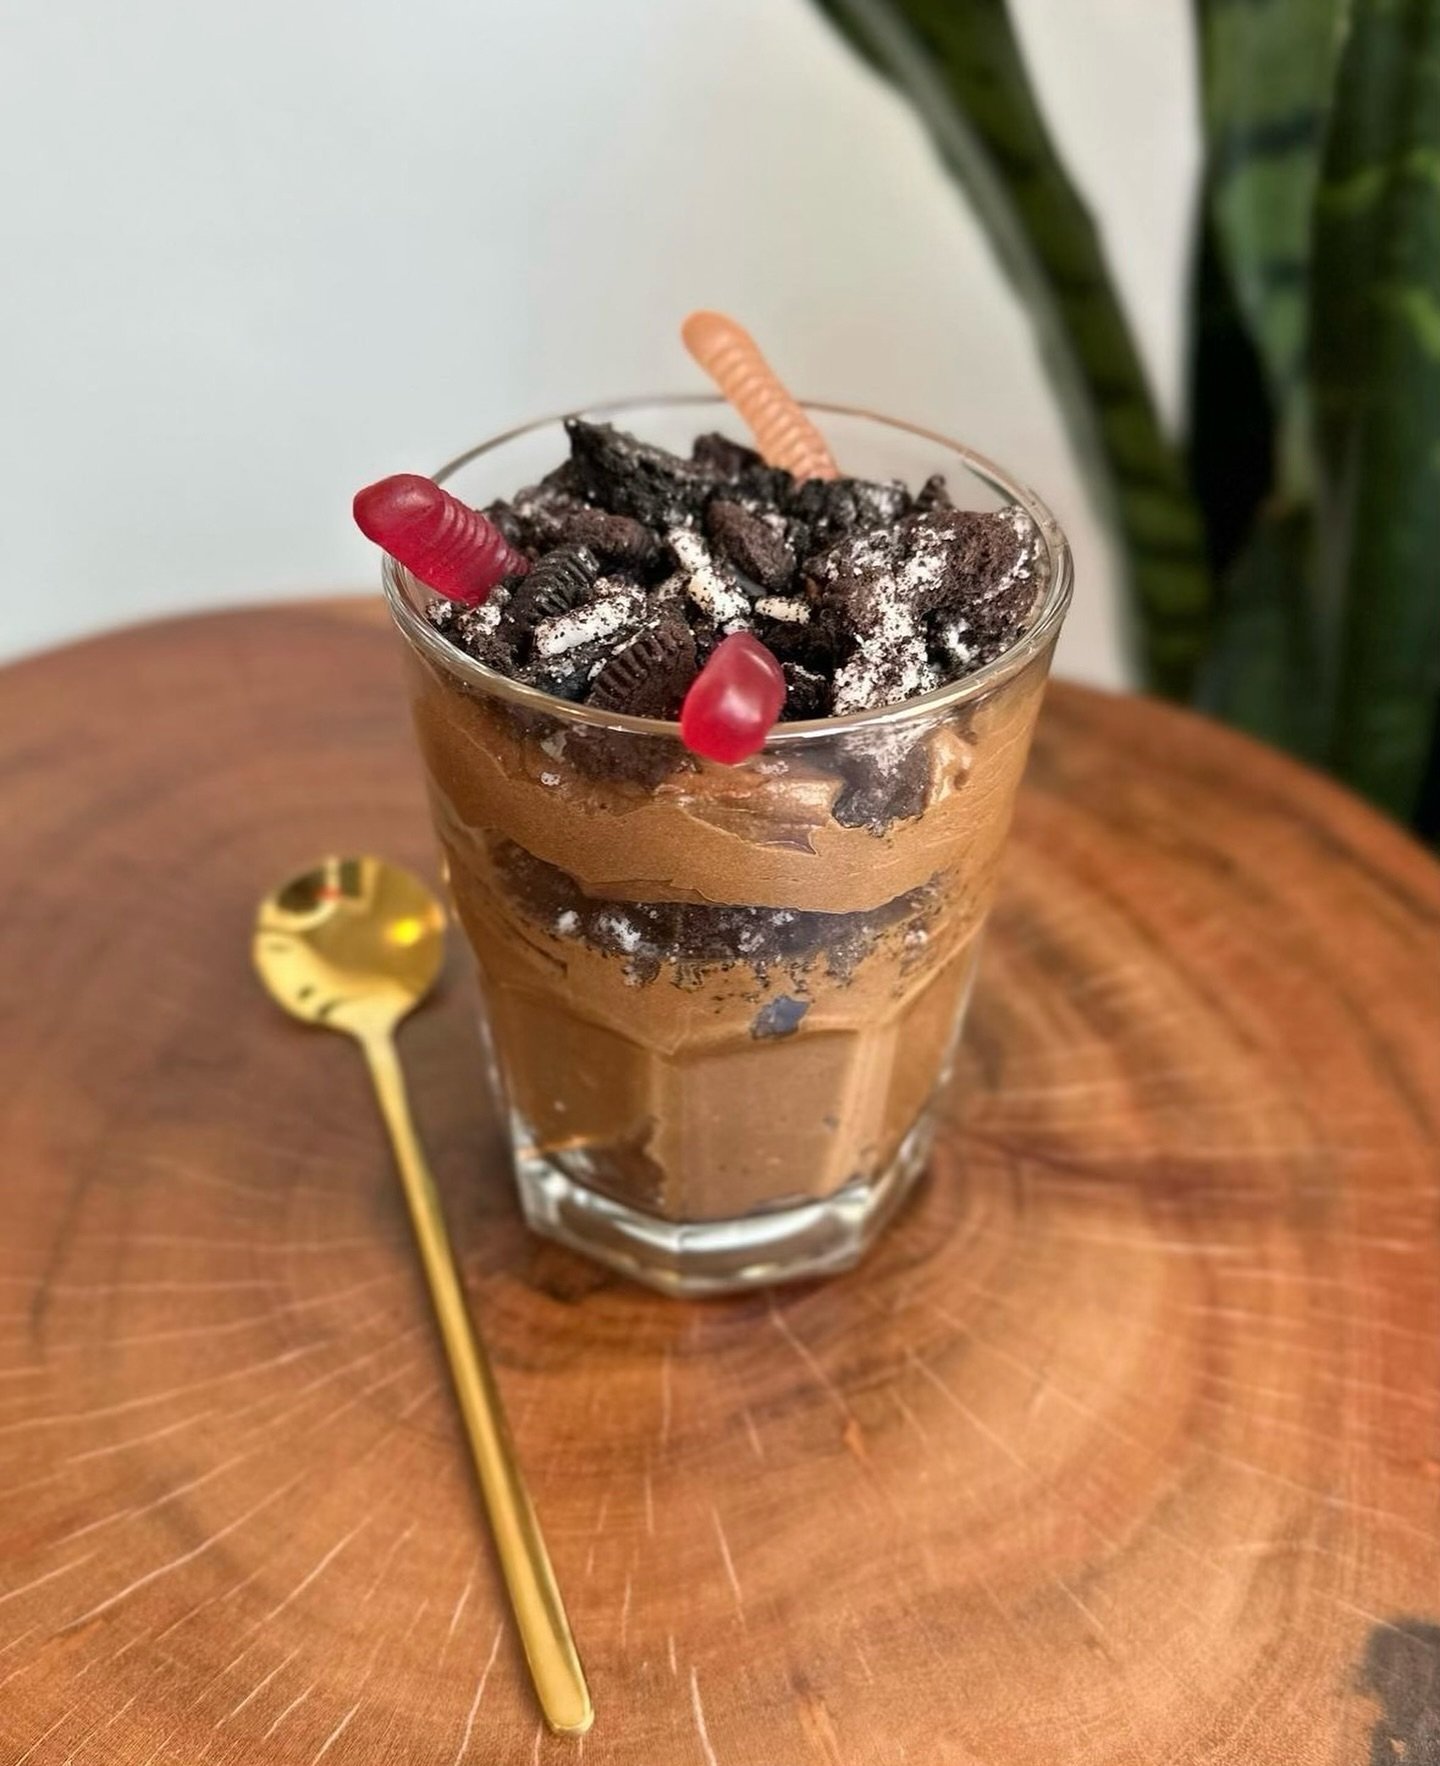 Celebrate Earth Day with us with a little dirt! 🐛 
Dirt Cup | Chocolate Avocado Mousse, Crumbled GF OREO Cookie, Organic Gummy Wormmmmmms!  Can be Vegan without gummy worms!

available through Monday ☀️ 

#cannon #dirt #earth #earthday